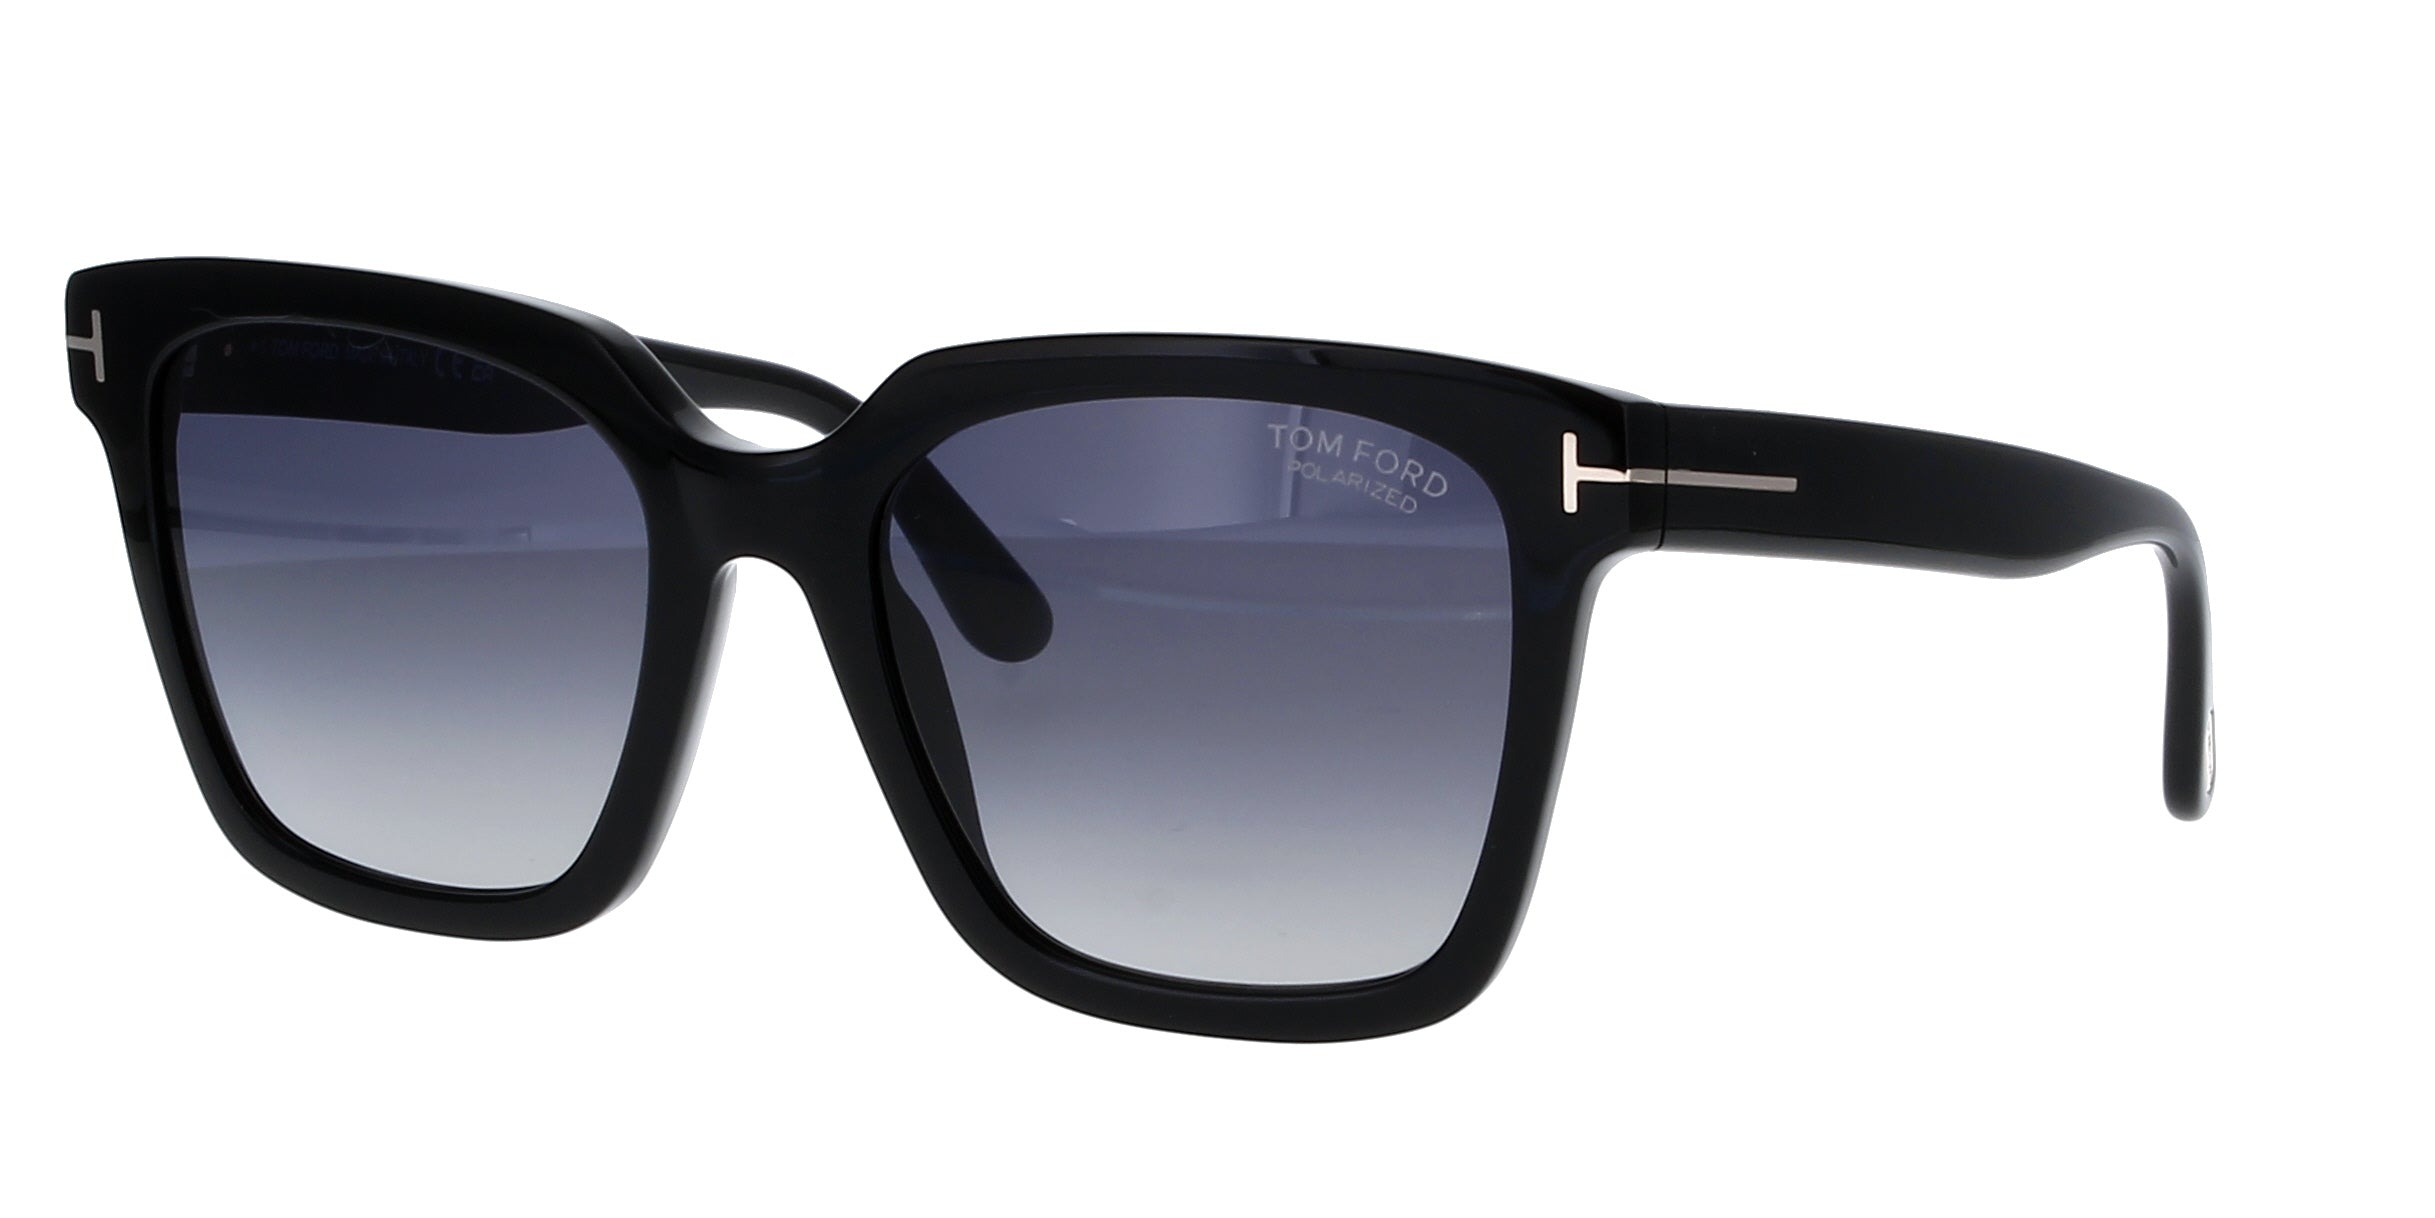 SELBY SUNGLASSES